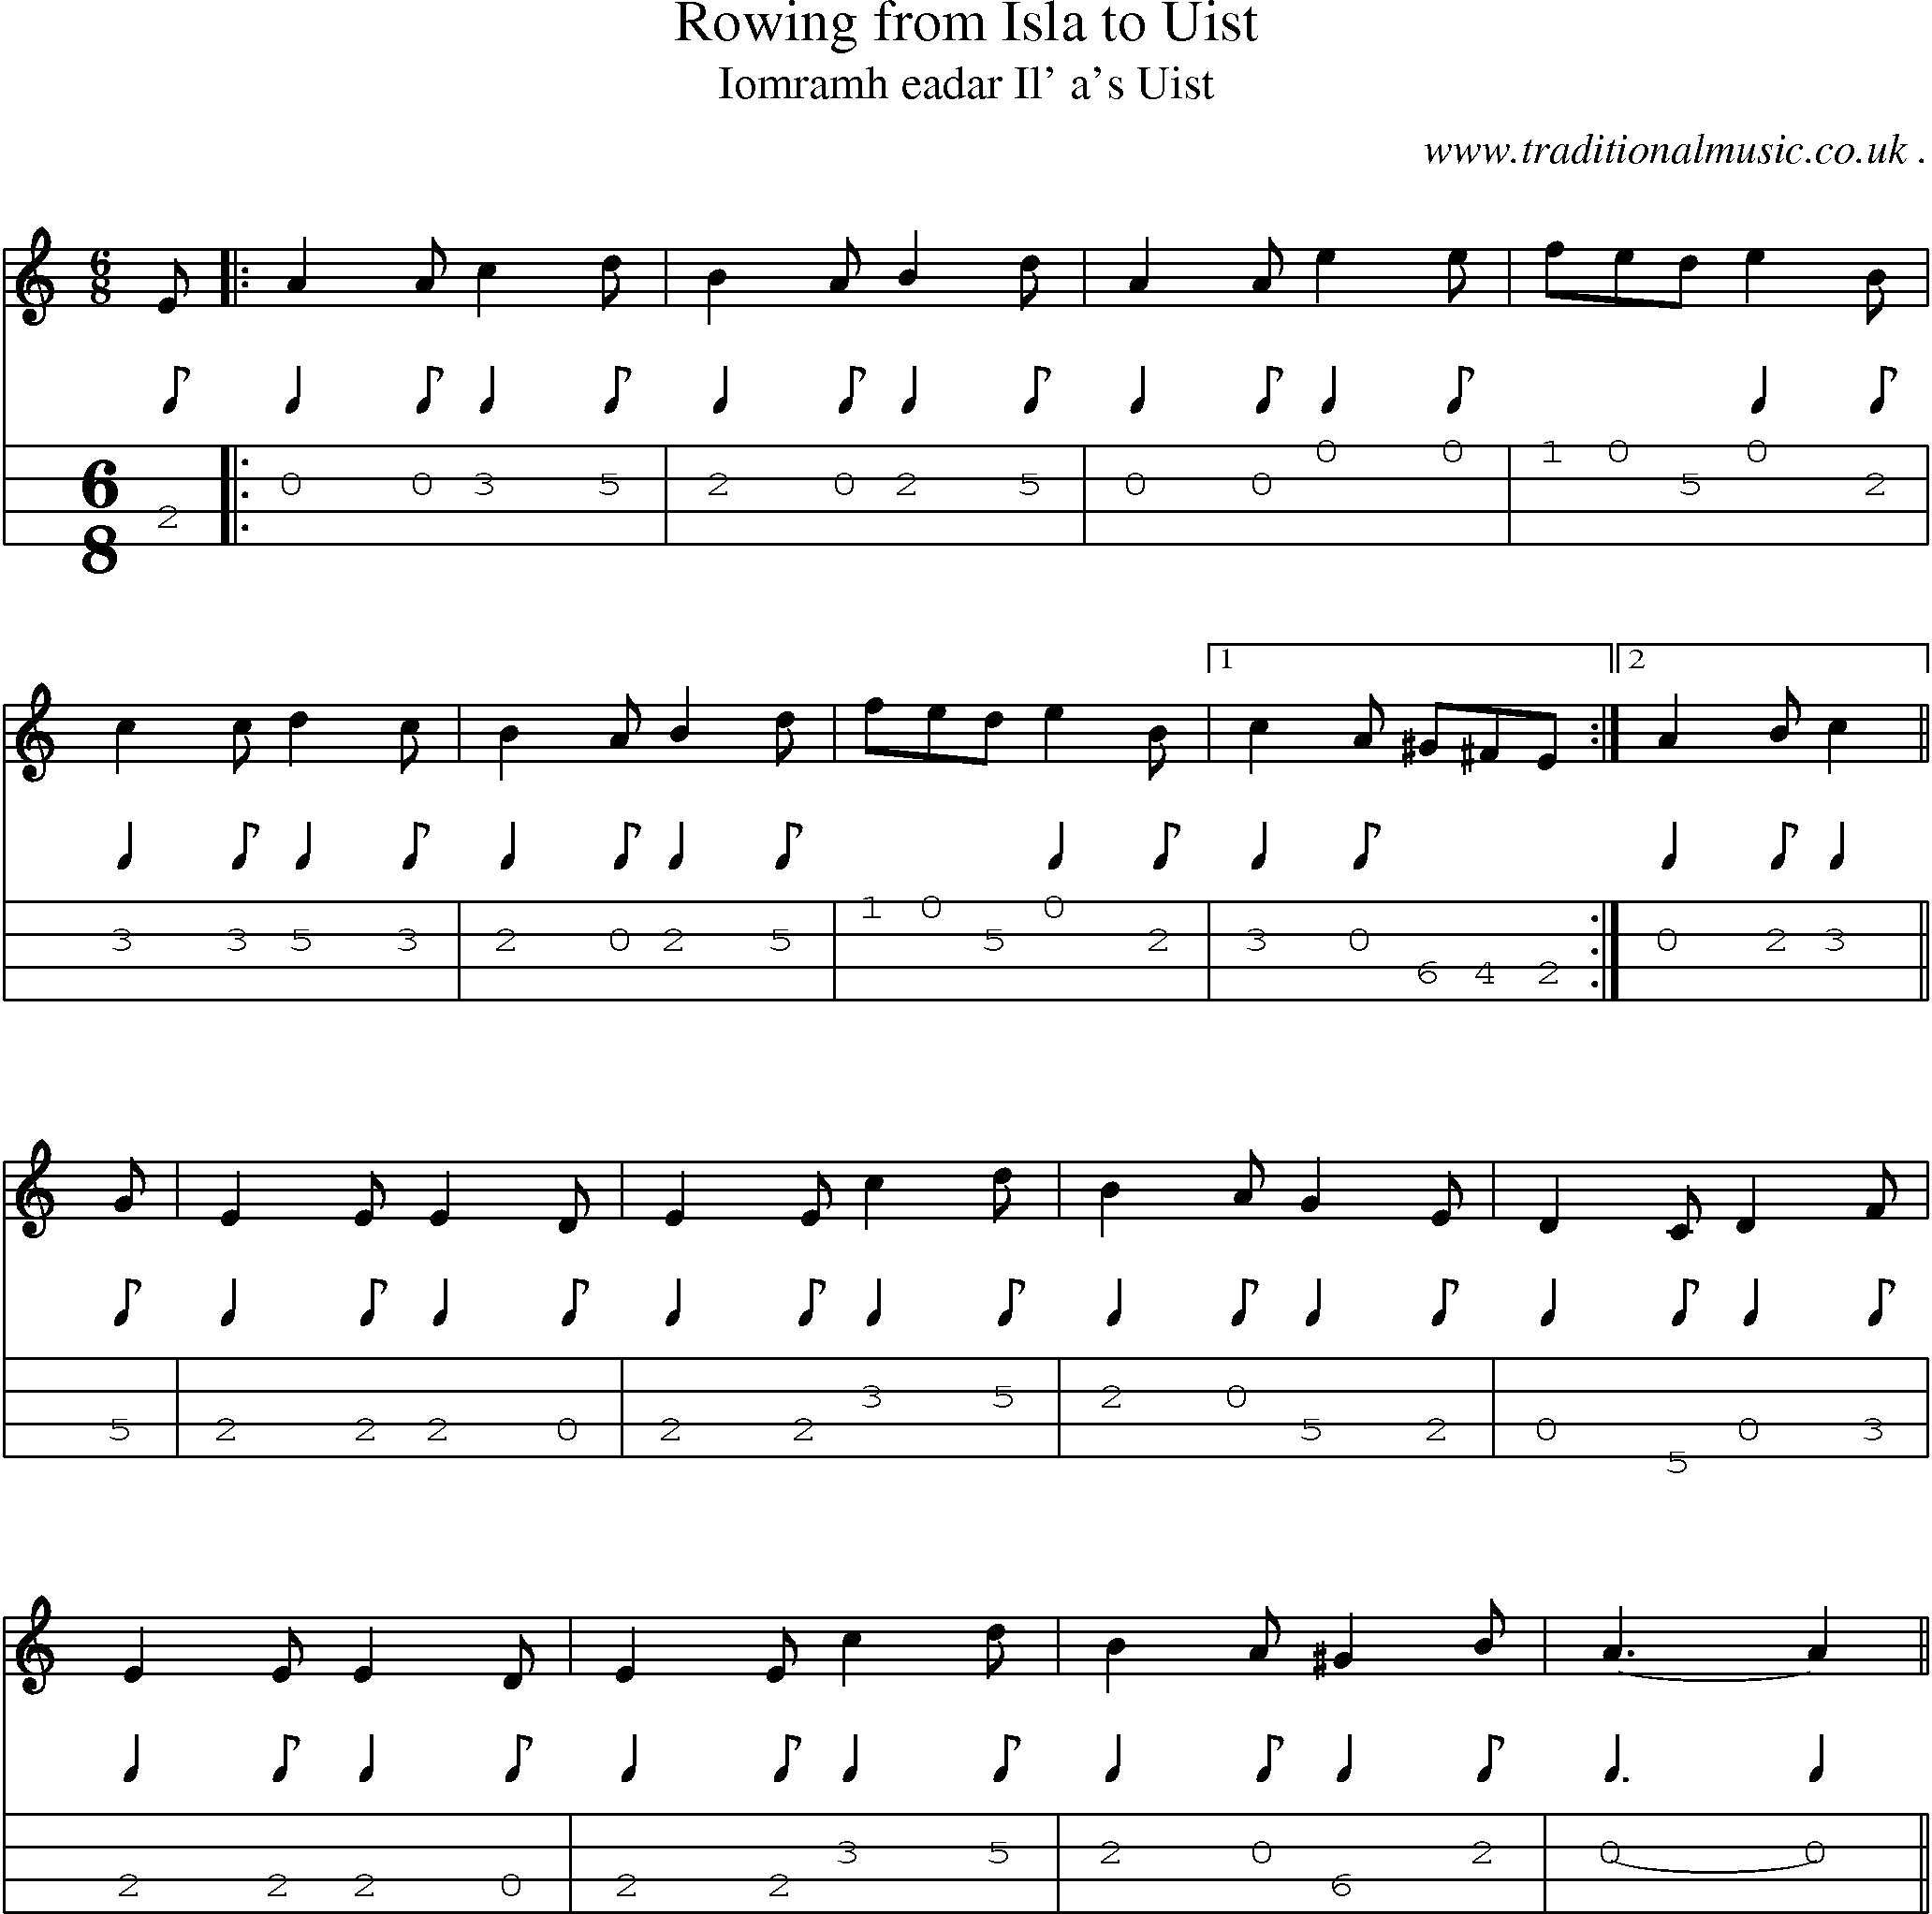 Sheet-music  score, Chords and Mandolin Tabs for Rowing From Isla To Uist